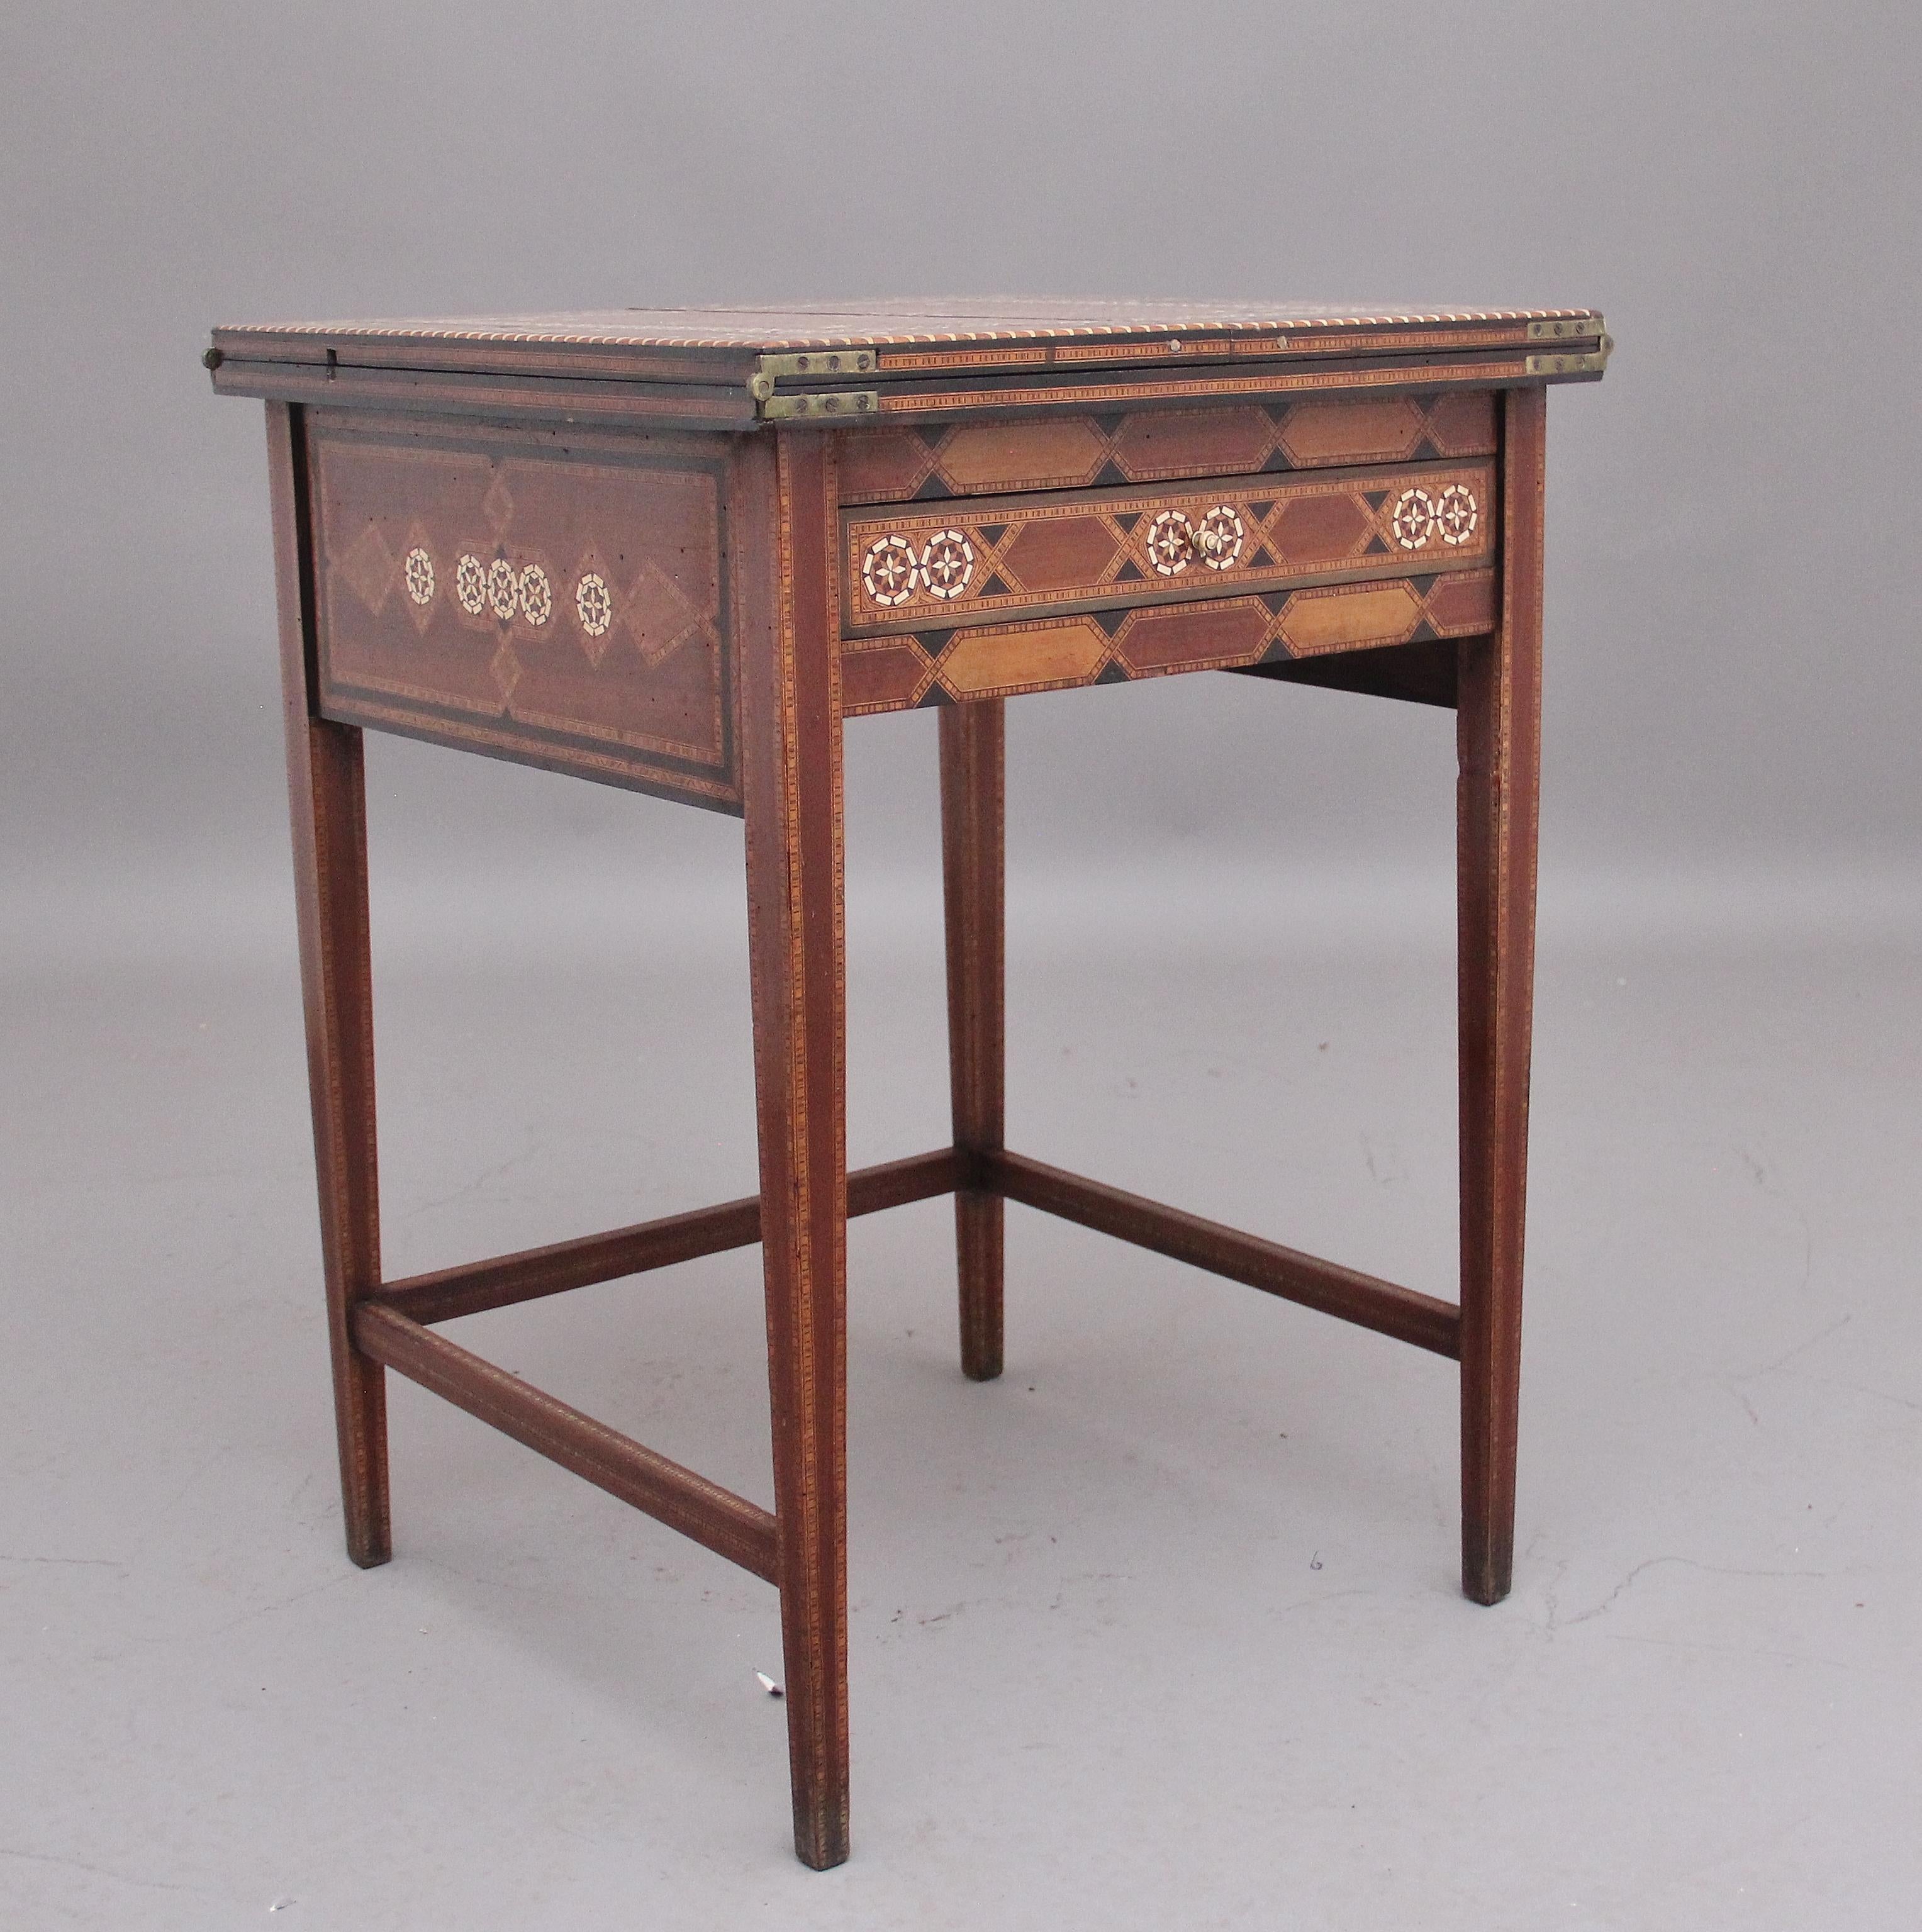 19th Century metamorphic Syrian writing table, the duel hinged top lifting up and folding over to reveal the rising writing desk top to reveal a green baize writing surface, various drawers and compartments, the whole table is profusely inlaid all